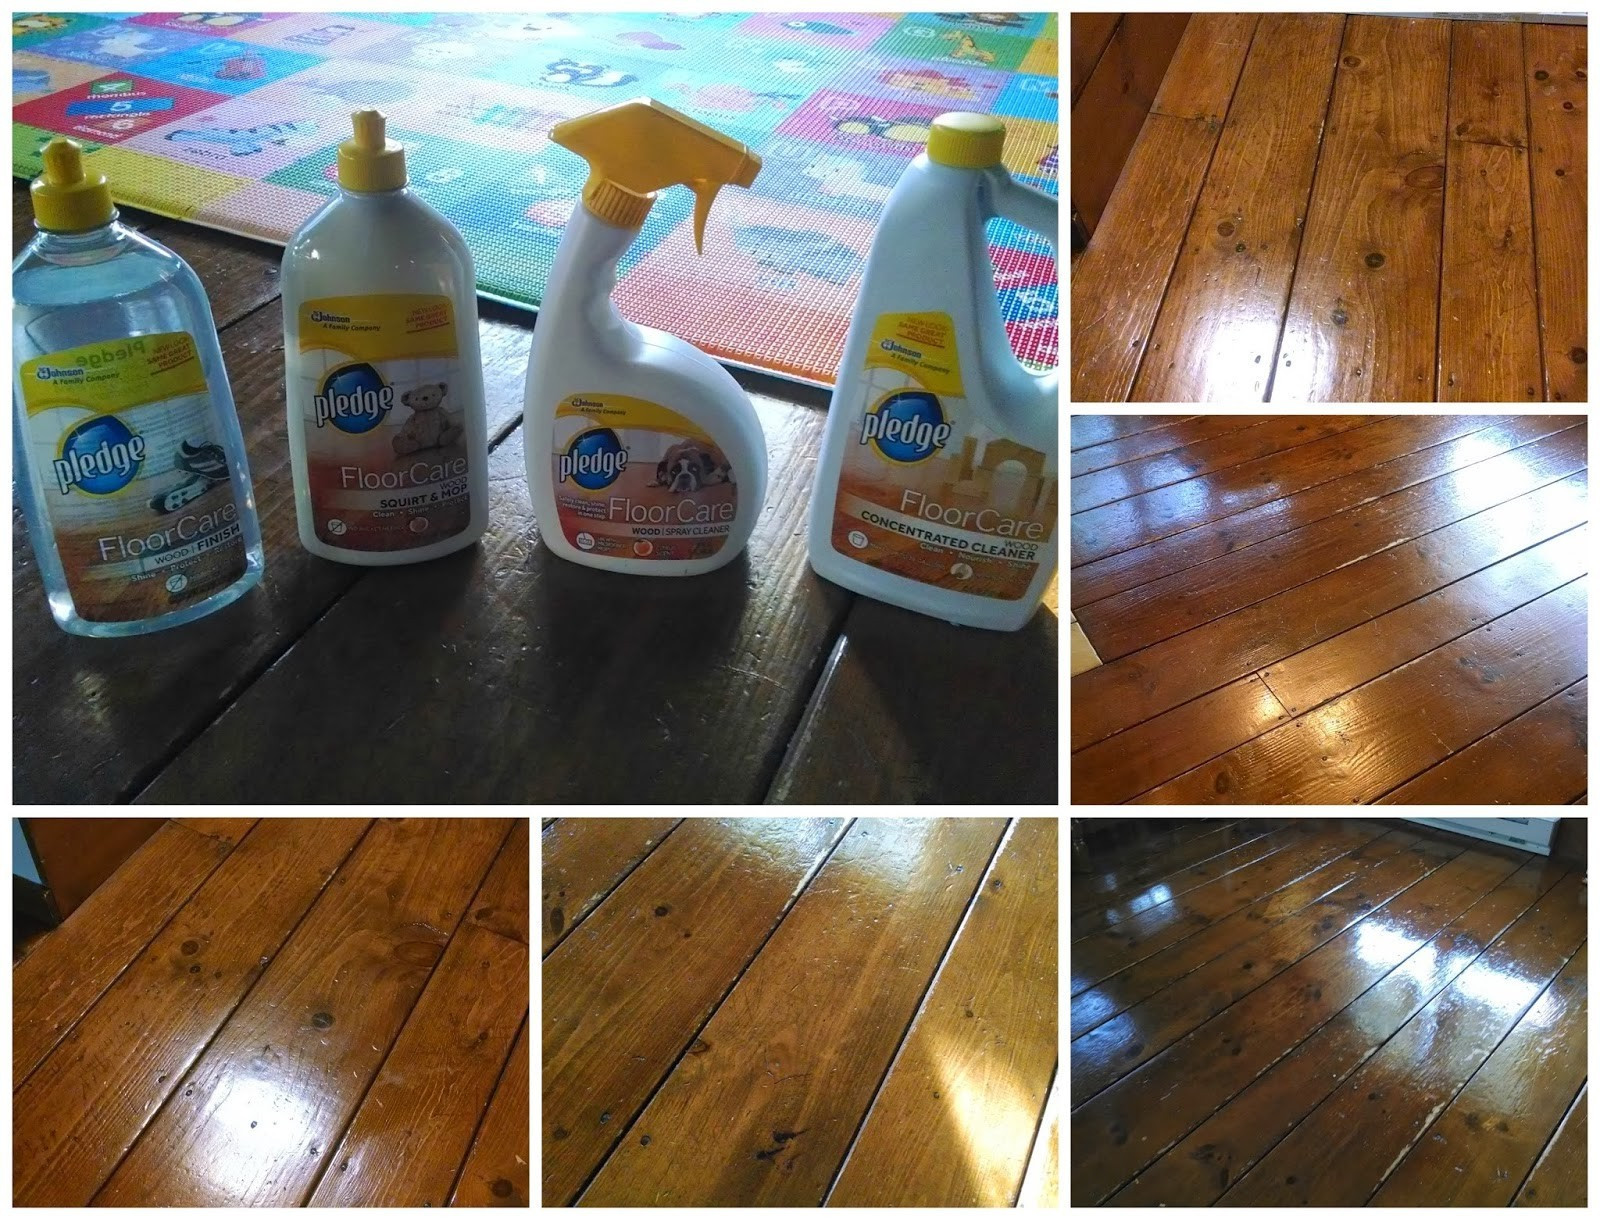 17 Nice How to Use Bona Hardwood Floor Cleaner 2024 free download how to use bona hardwood floor cleaner of 17 awesome what to use to clean hardwood floors image dizpos com pertaining to what to use to clean hardwood floors fresh 24 best pics best ways to 